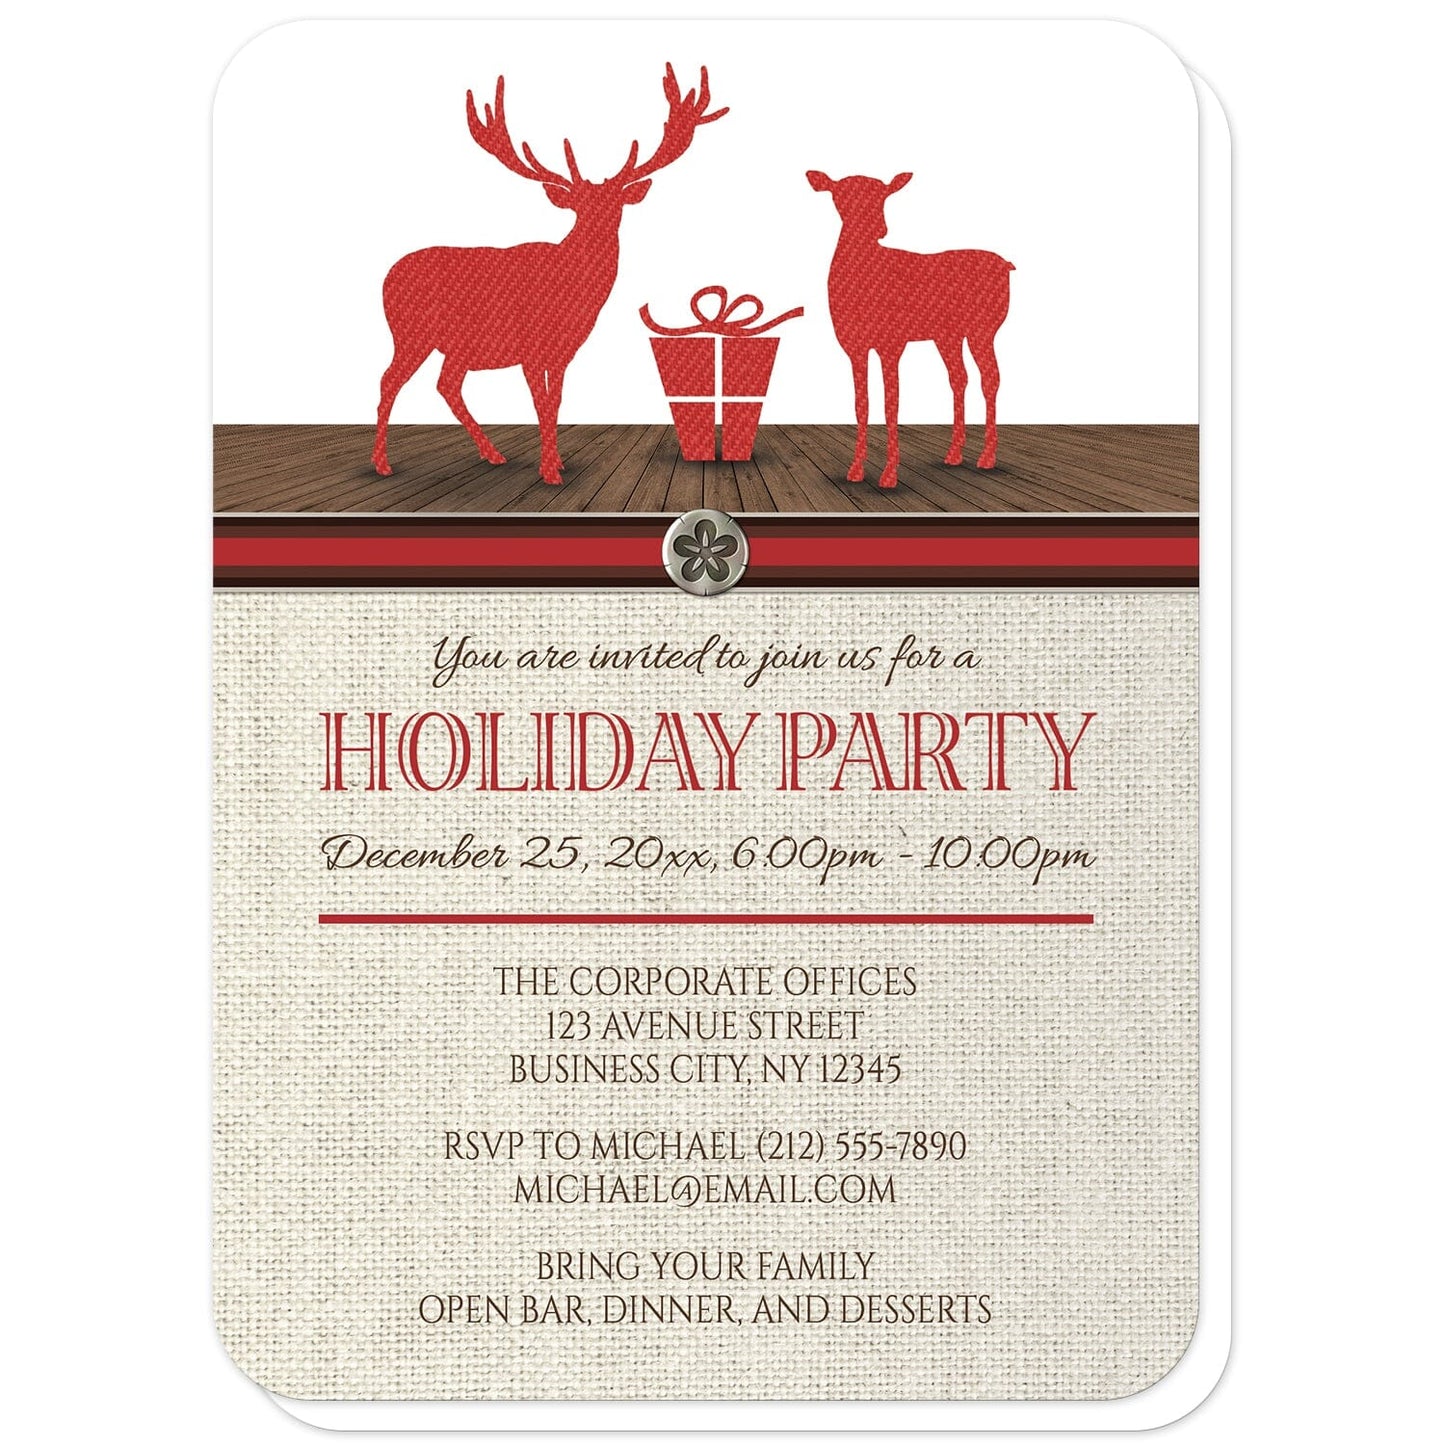 Rustic Deer Burlap Red Holiday Party Invitations (with rounded corners) at Artistically Invited. Rustic deer burlap red holiday party invitations designed with two deer standing with a present in a red silhouette design with a denim pattern on a brown wood floor at the top of the invitations. Your personalized holiday party details are custom printed in red and brown over a beige burlap background illustration. 